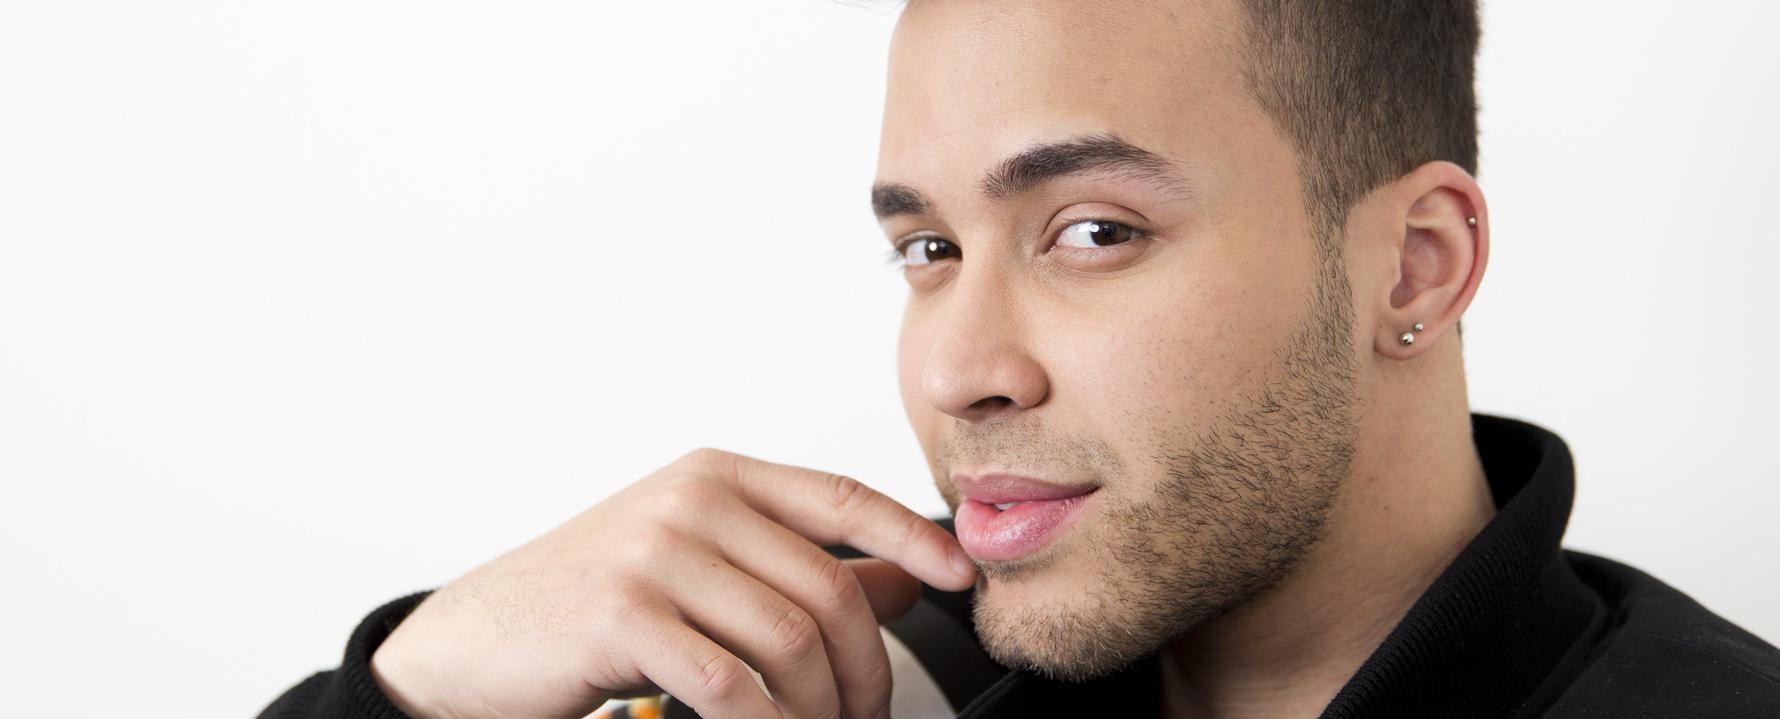 Promotional photograph of Prince Royce.